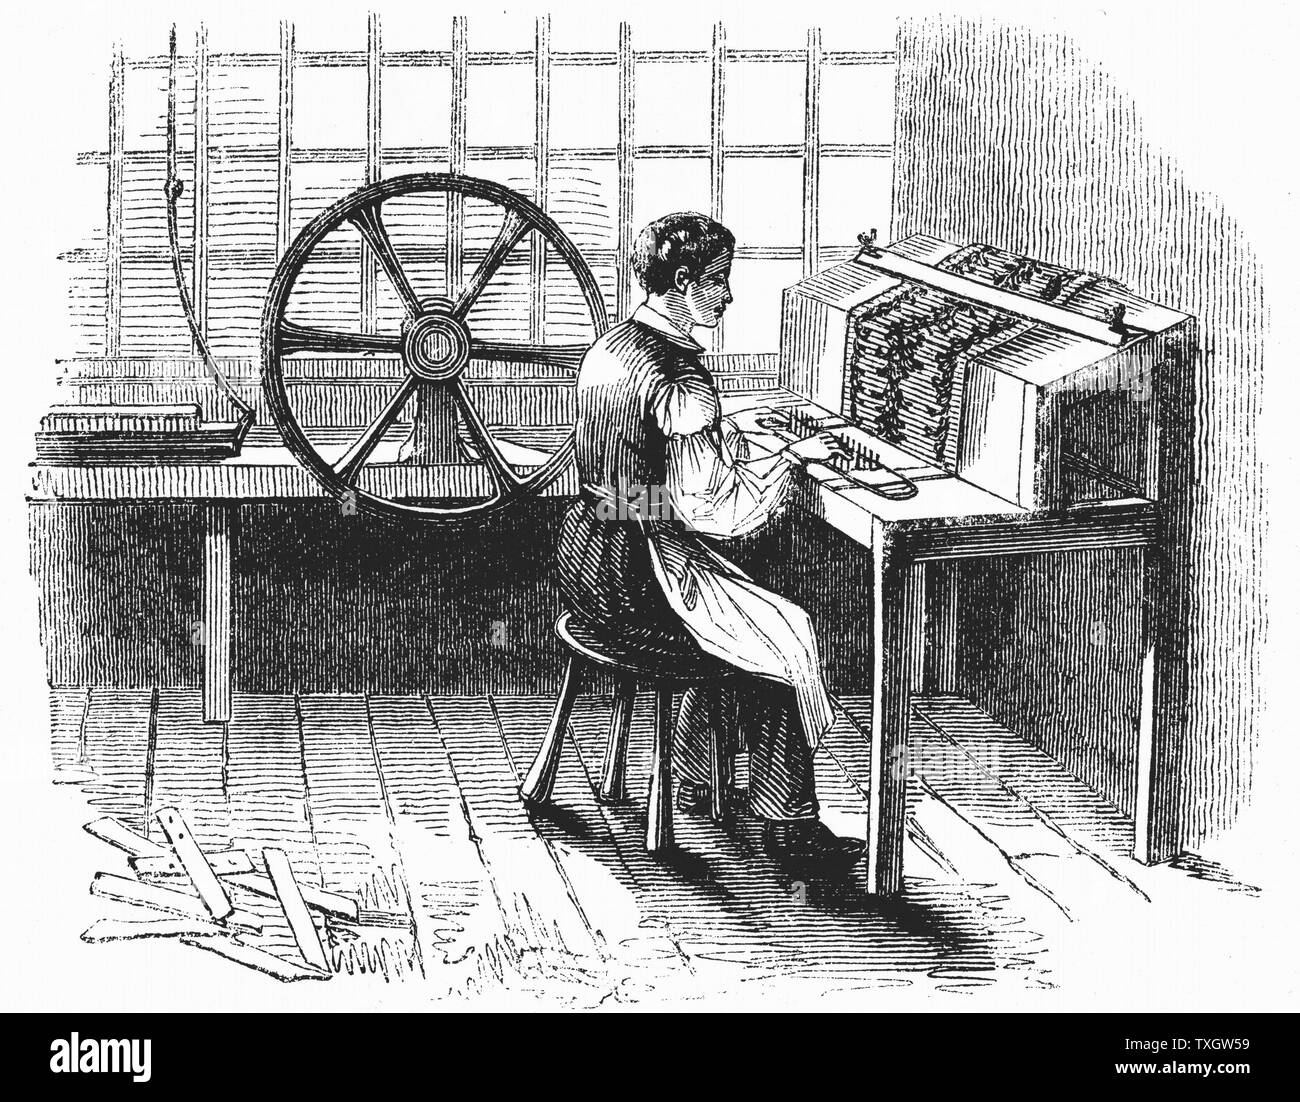 Man operating machine for punching cards for Jacquard looms. Card for each weft thread of pattern. 400-800 normal, but sometimes 24,000 were worked. From George Dodd 'The Textile Manufactures of Great Britain',  1844 Engraving  London Stock Photo